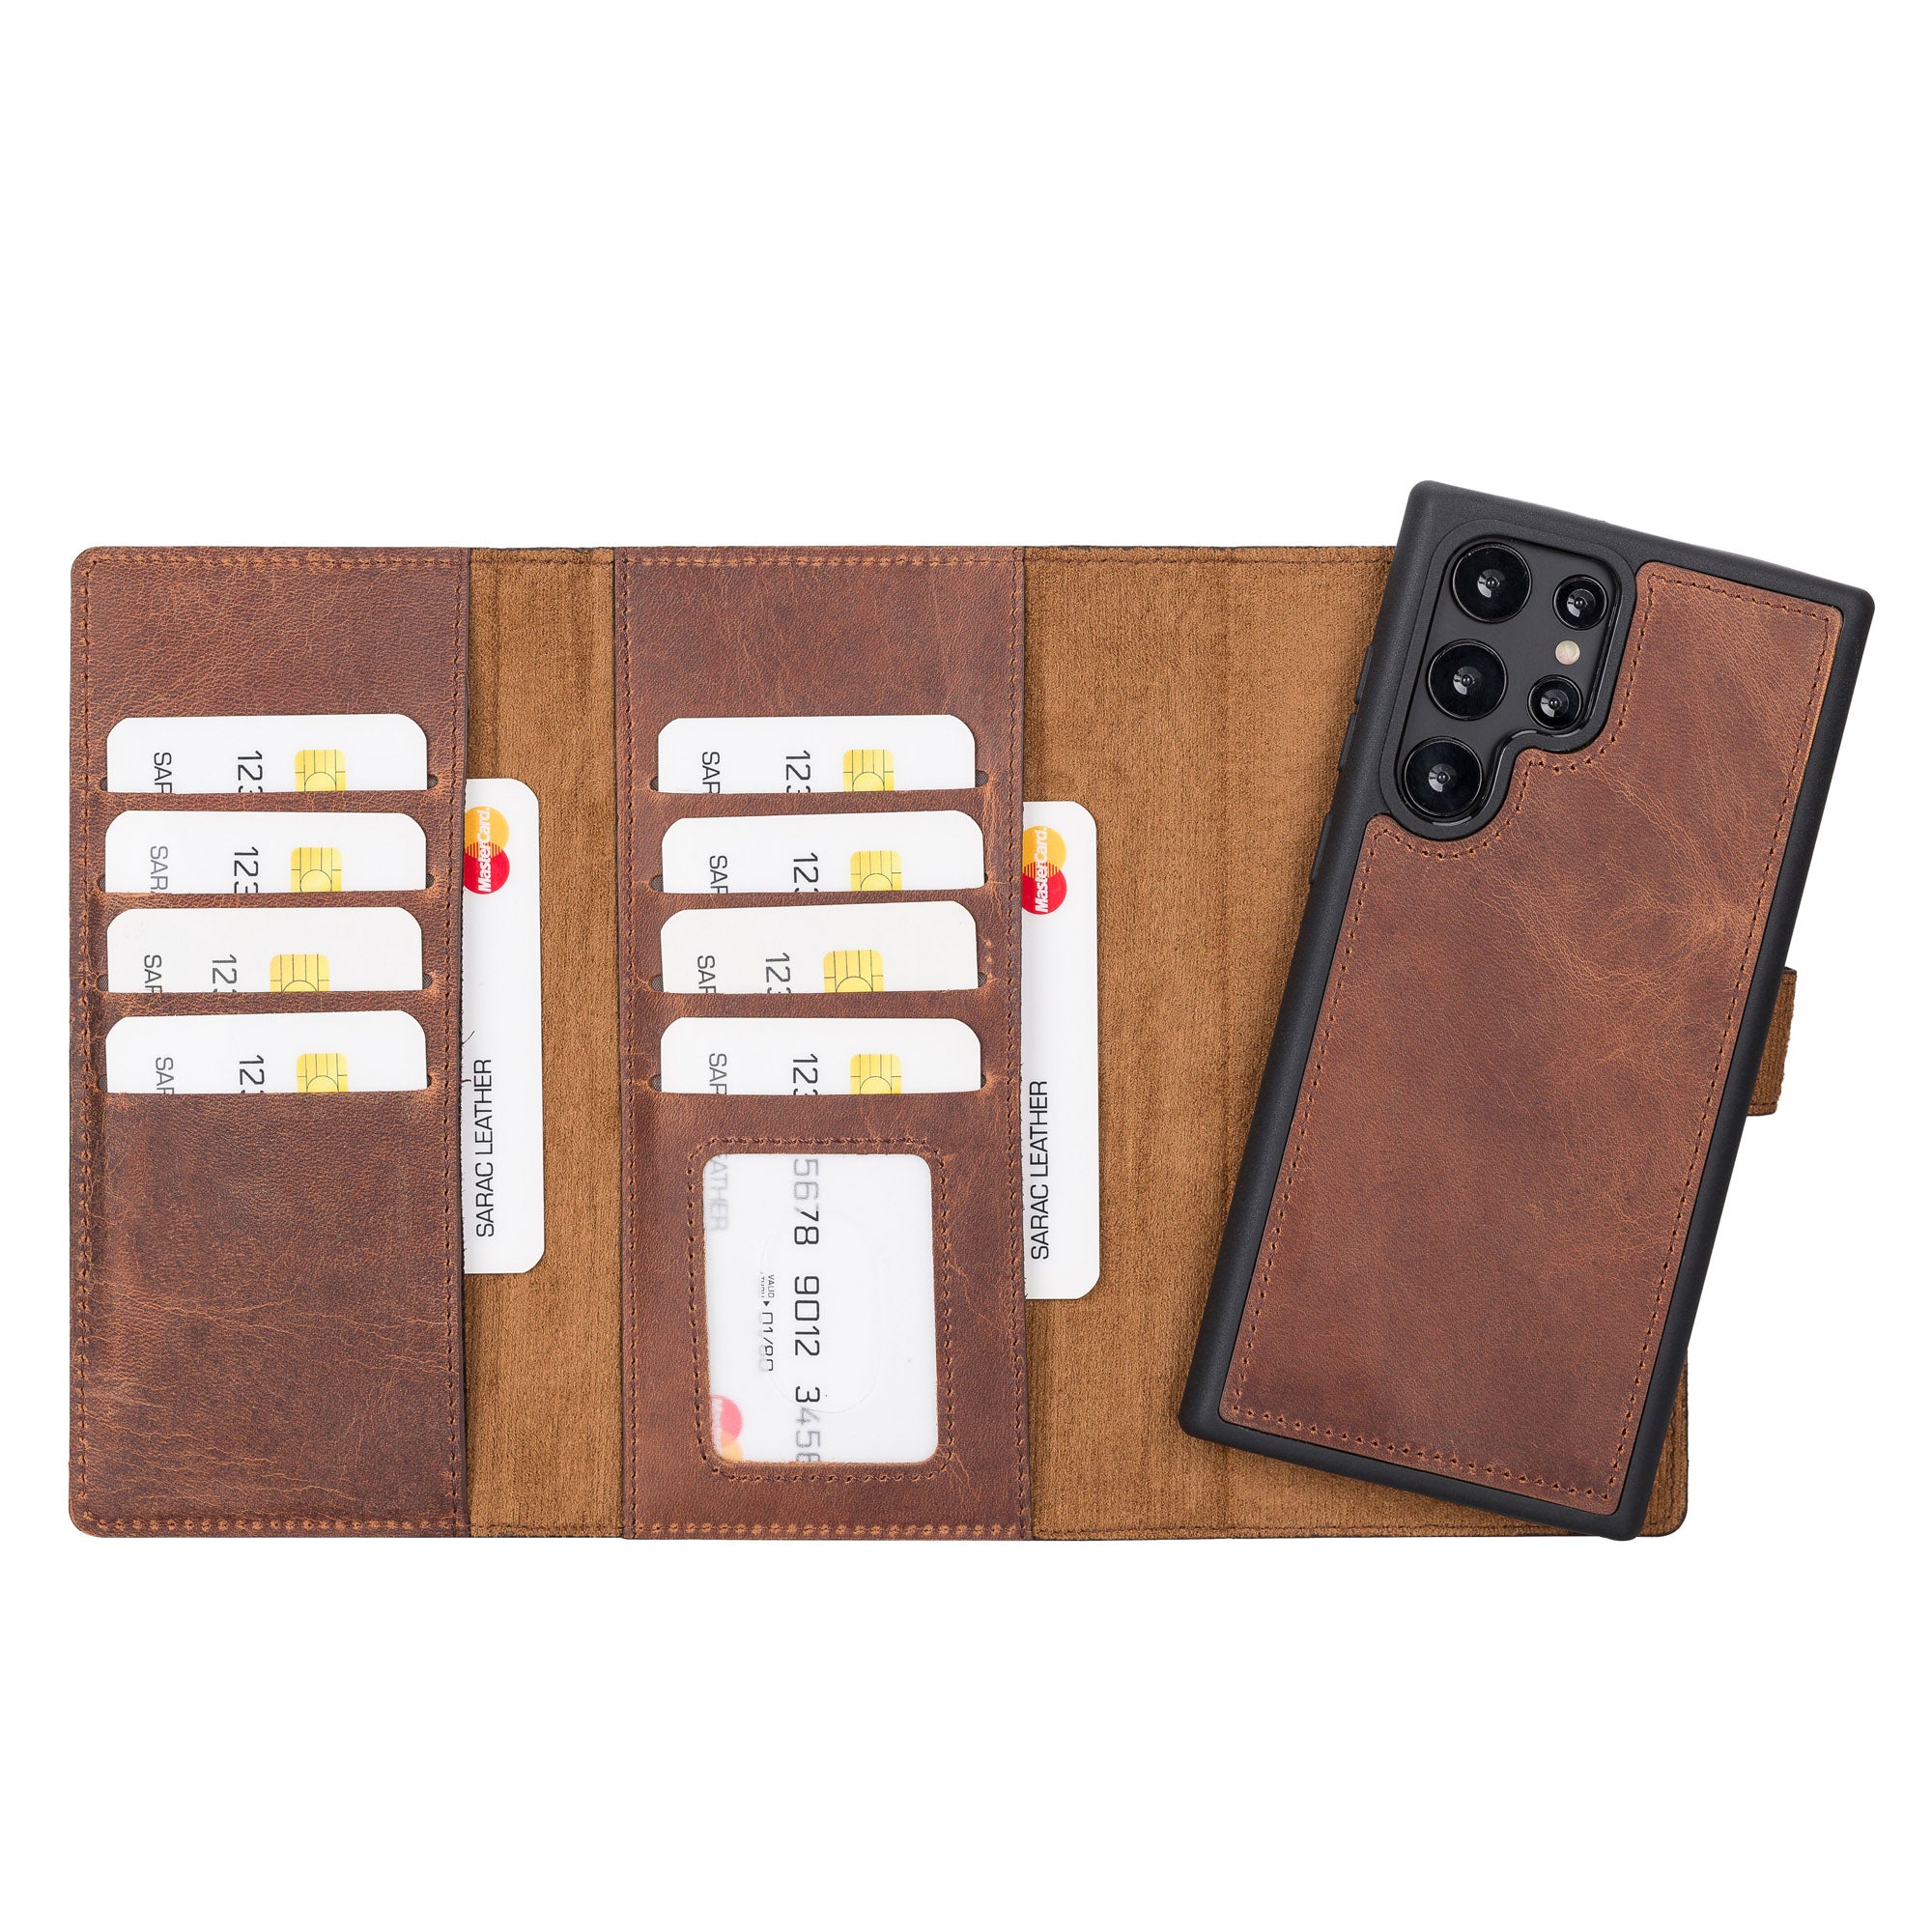 Samsung Galaxy S23 Series Leather Wallet Cases - Mw, Galaxy S23 / Tan